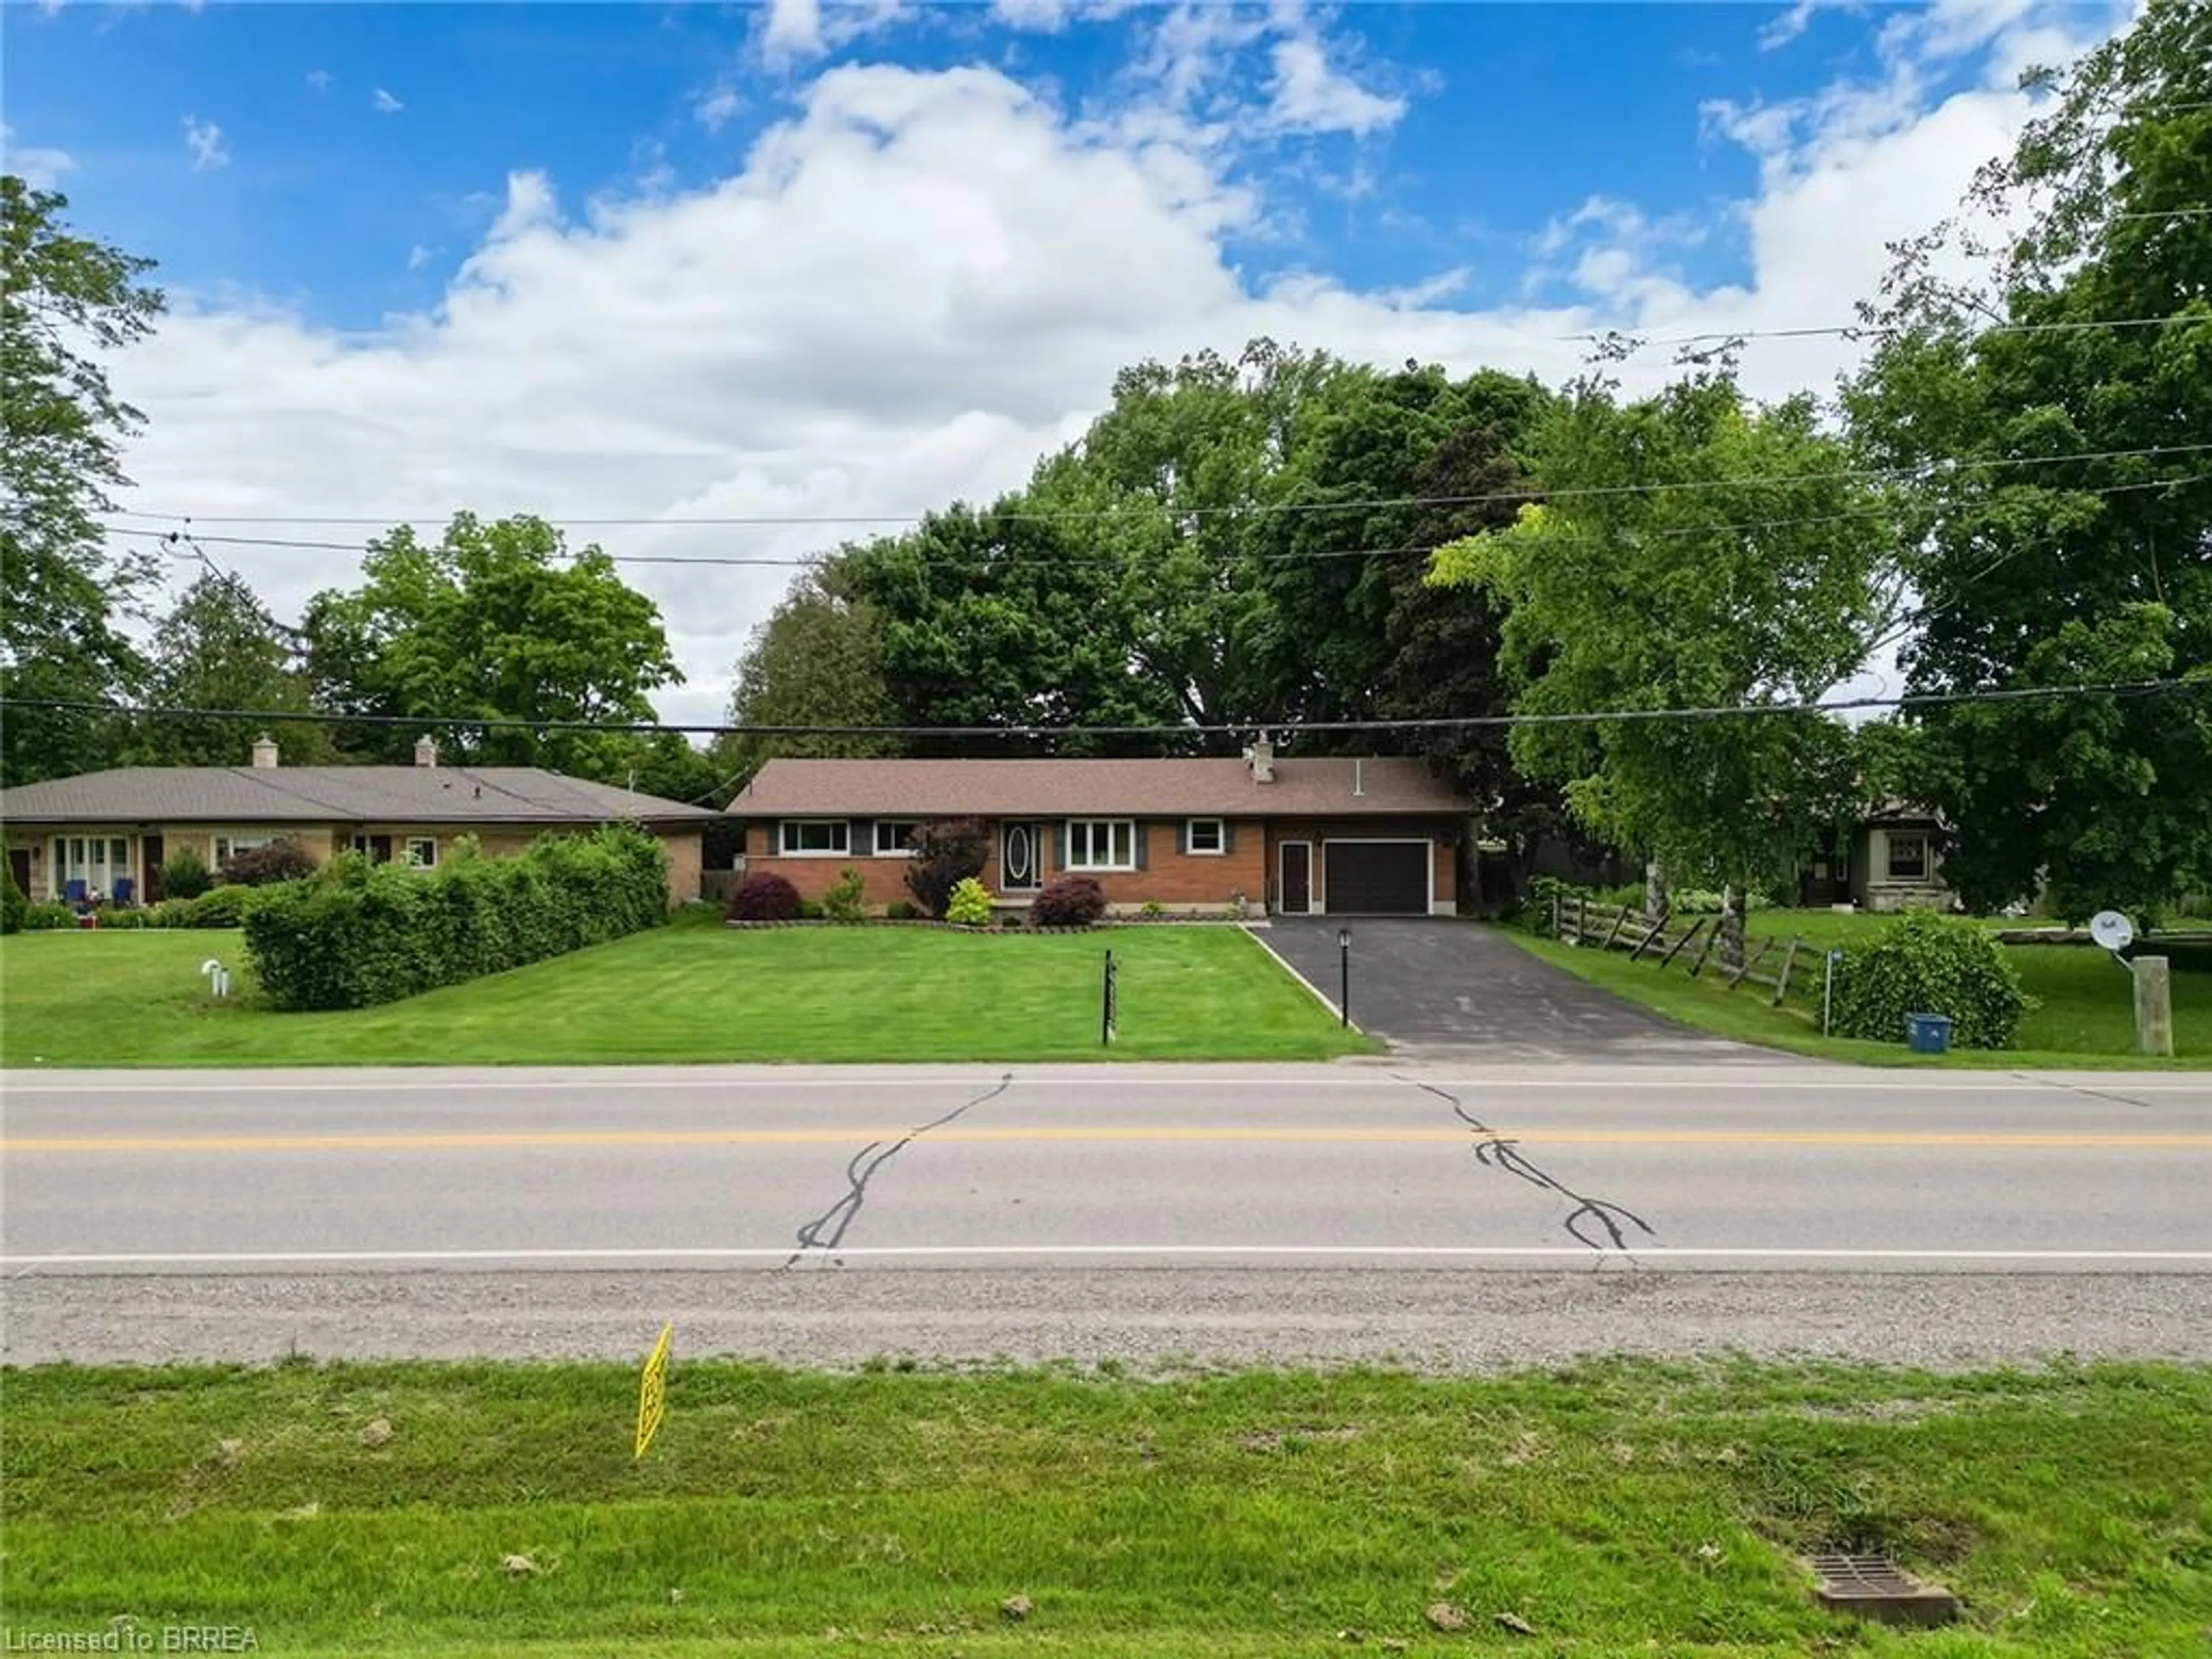 Frontside or backside of a home for 445 Powerline Rd, Brantford Ontario N3T 5L8